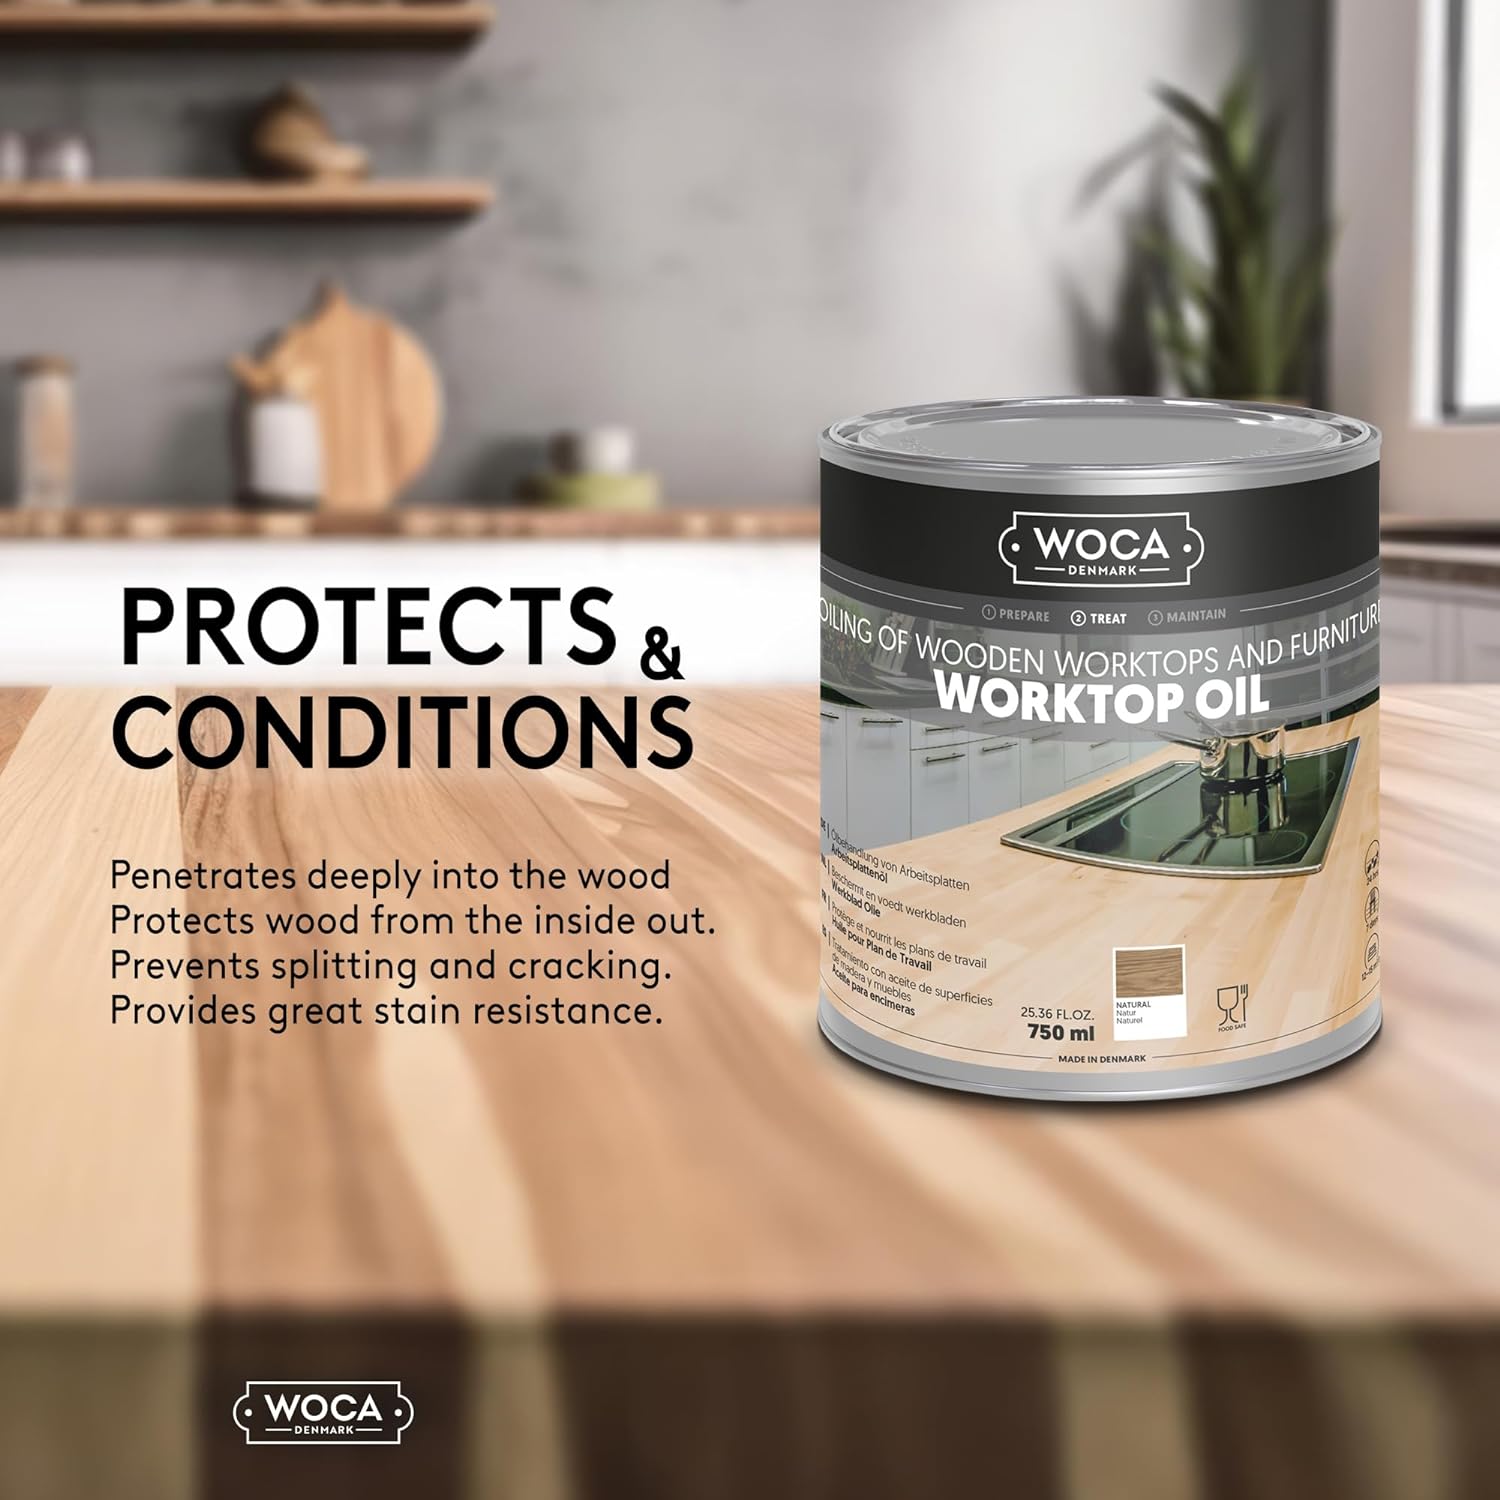 WOCA Denmark Worktop Oil Natural |750 ml| Finish & Restore Wood Butcher Block countertops, Cutting Boards, Kitchen Furniture and Other Wood Items Naturally. Food Contact Safe : Health & Household